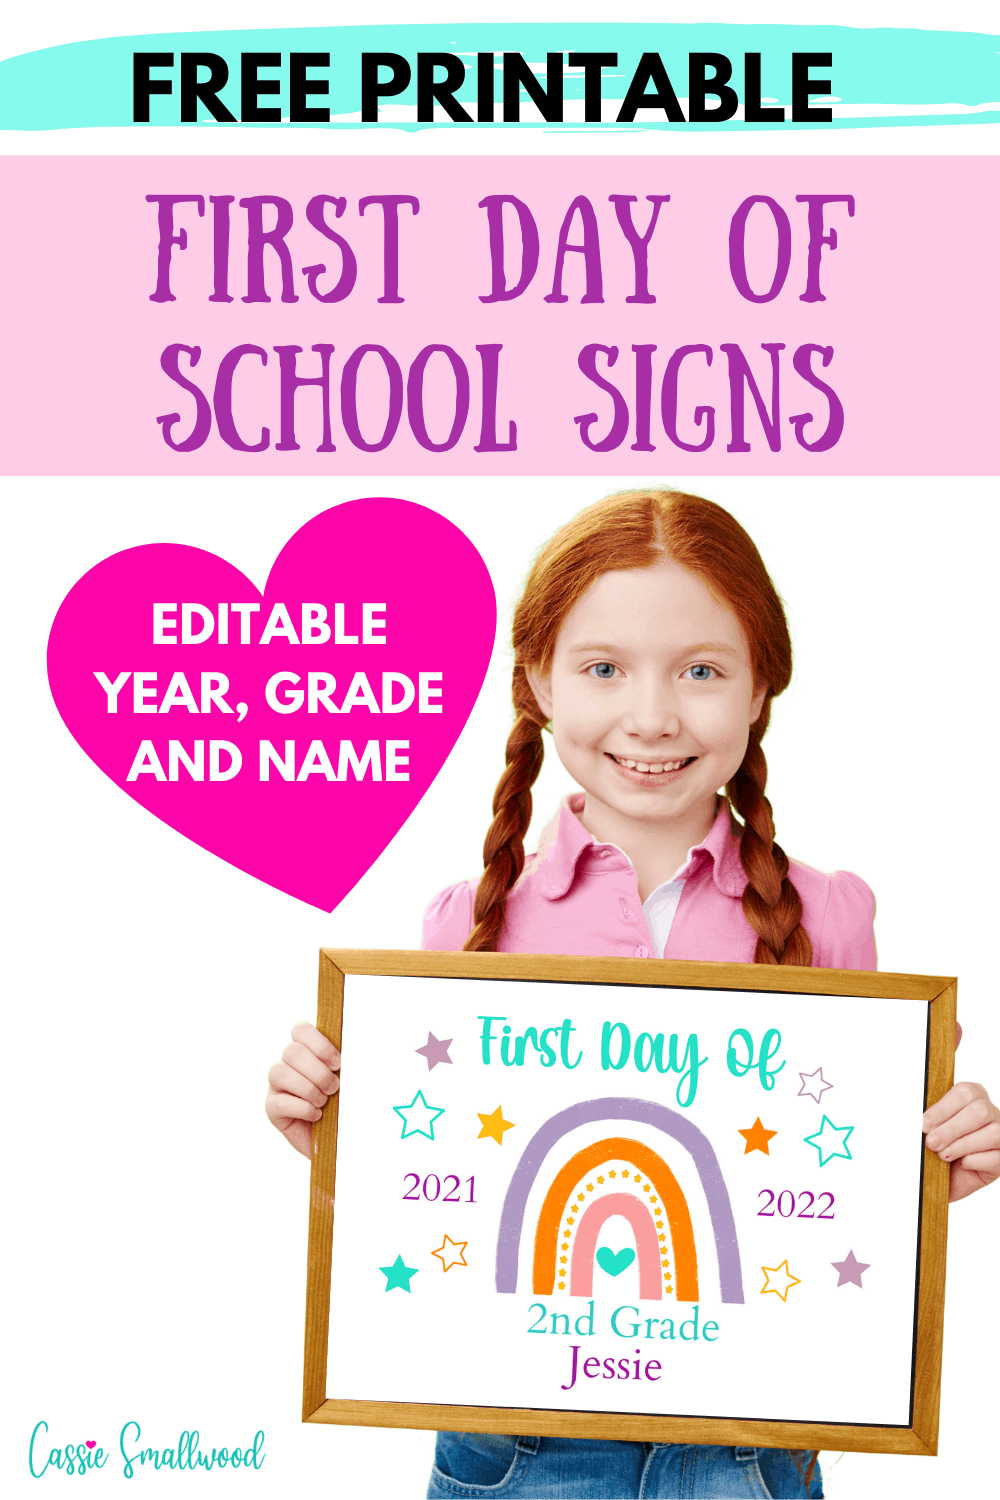 Free editable first day of school signs templates to print out